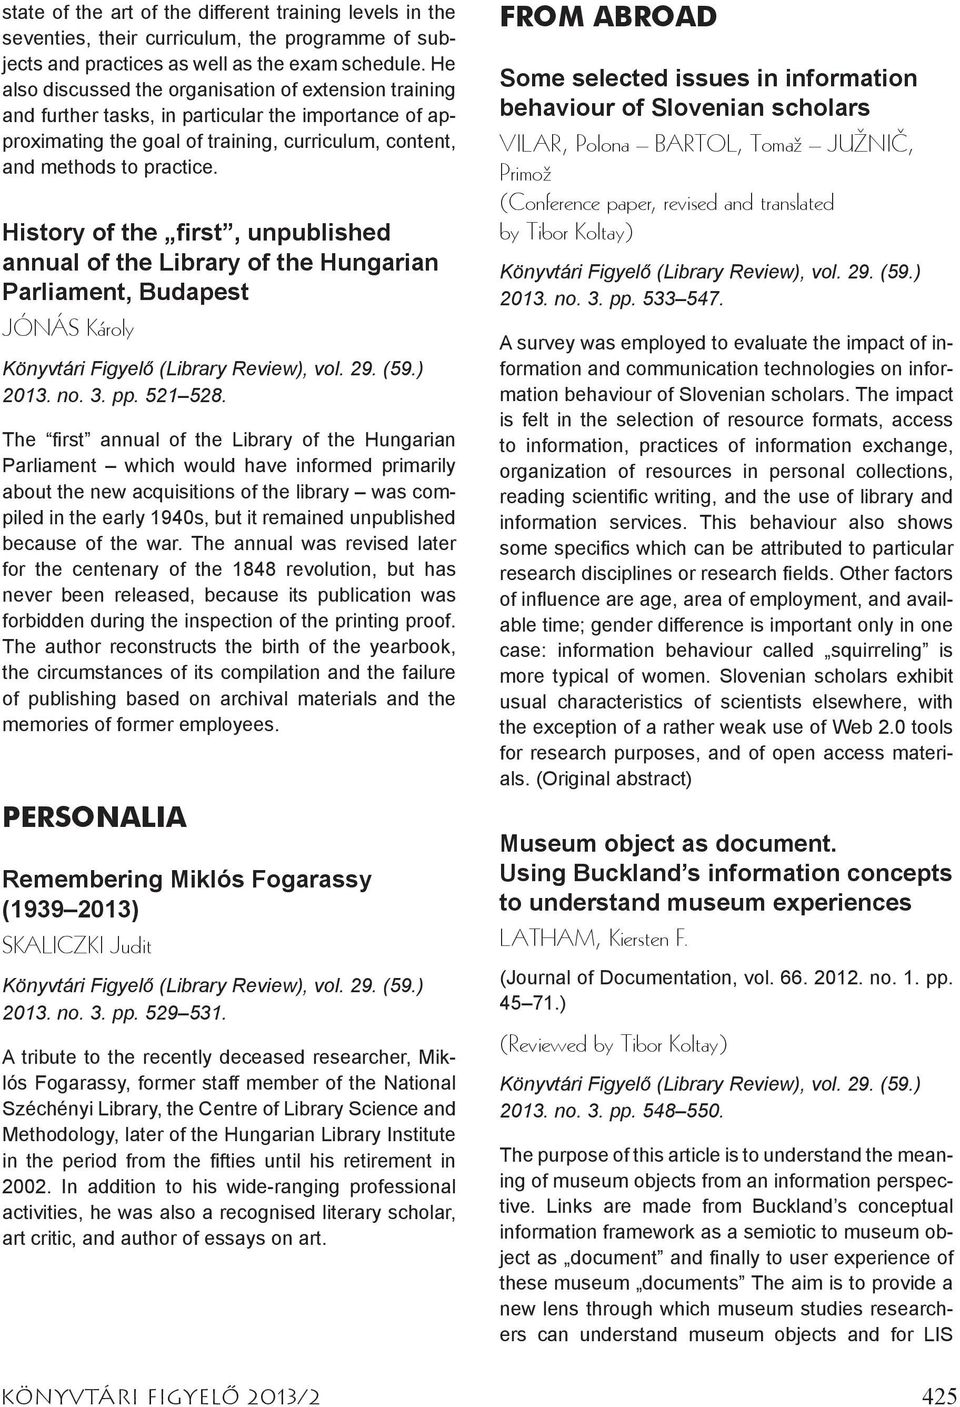 History of the first, unpublished annual of the Library of the Hungarian Parliament, Budapest JÓNÁS Károly Könyvtári Figyelő (Library Review), vol. 29. (59.) 2013. no. 3. pp. 521 528.